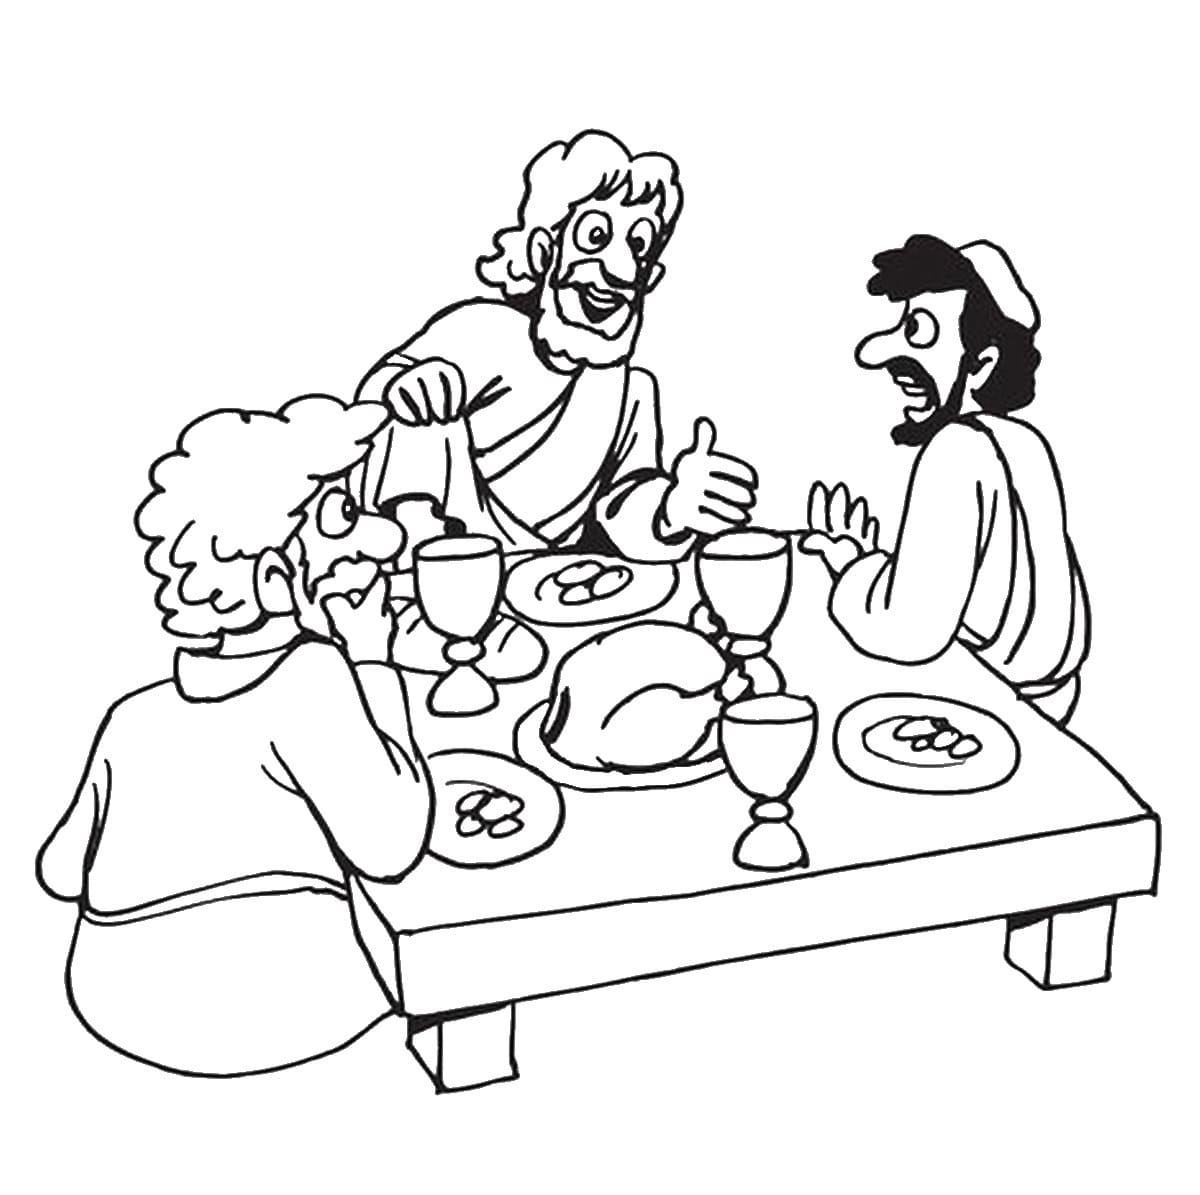 Passover For Kids coloring page - Download, Print or Color Online for Free